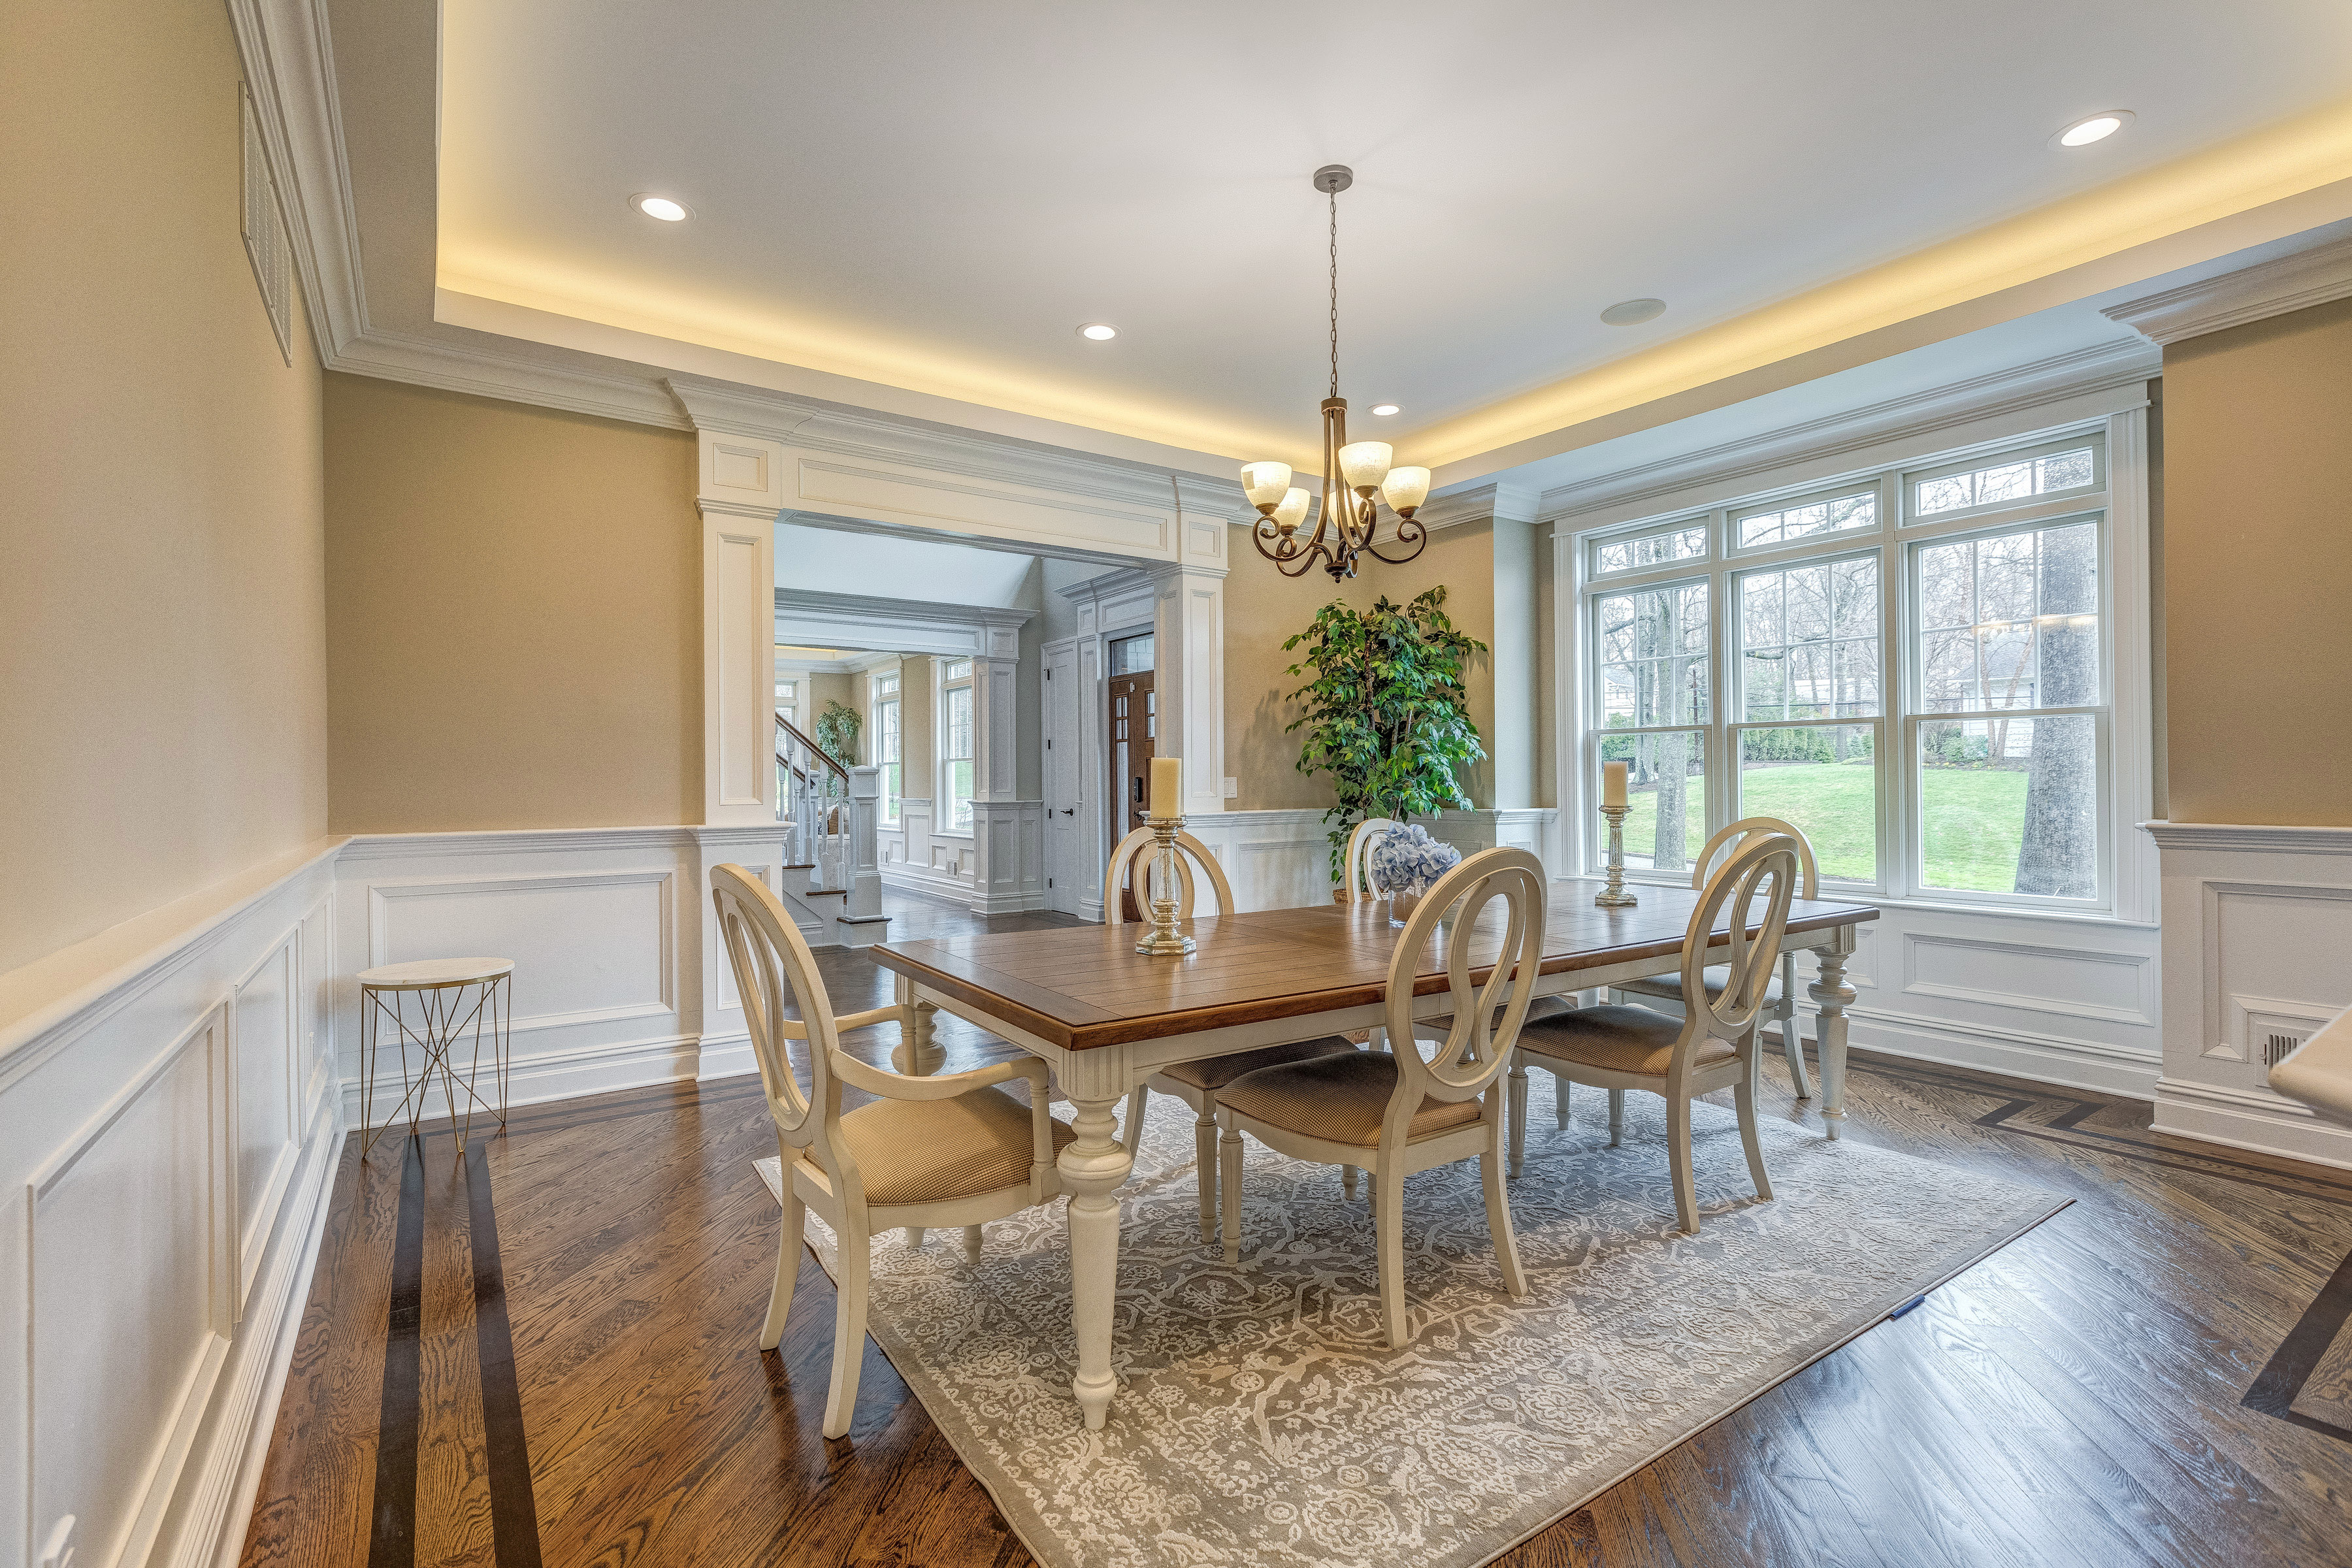 12 – 93 Slope Drive – Dining Room